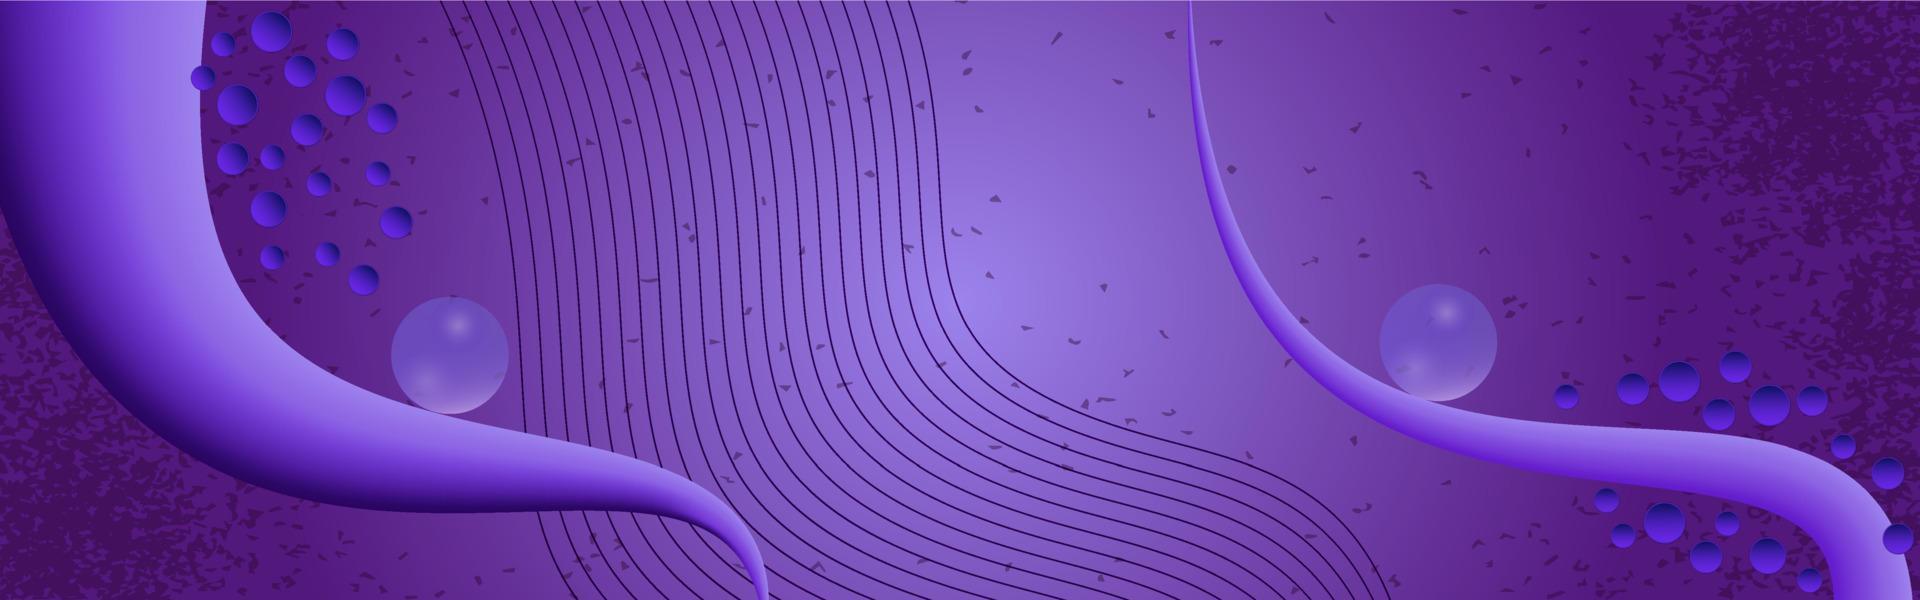 Abstract creative lines art purple background vector